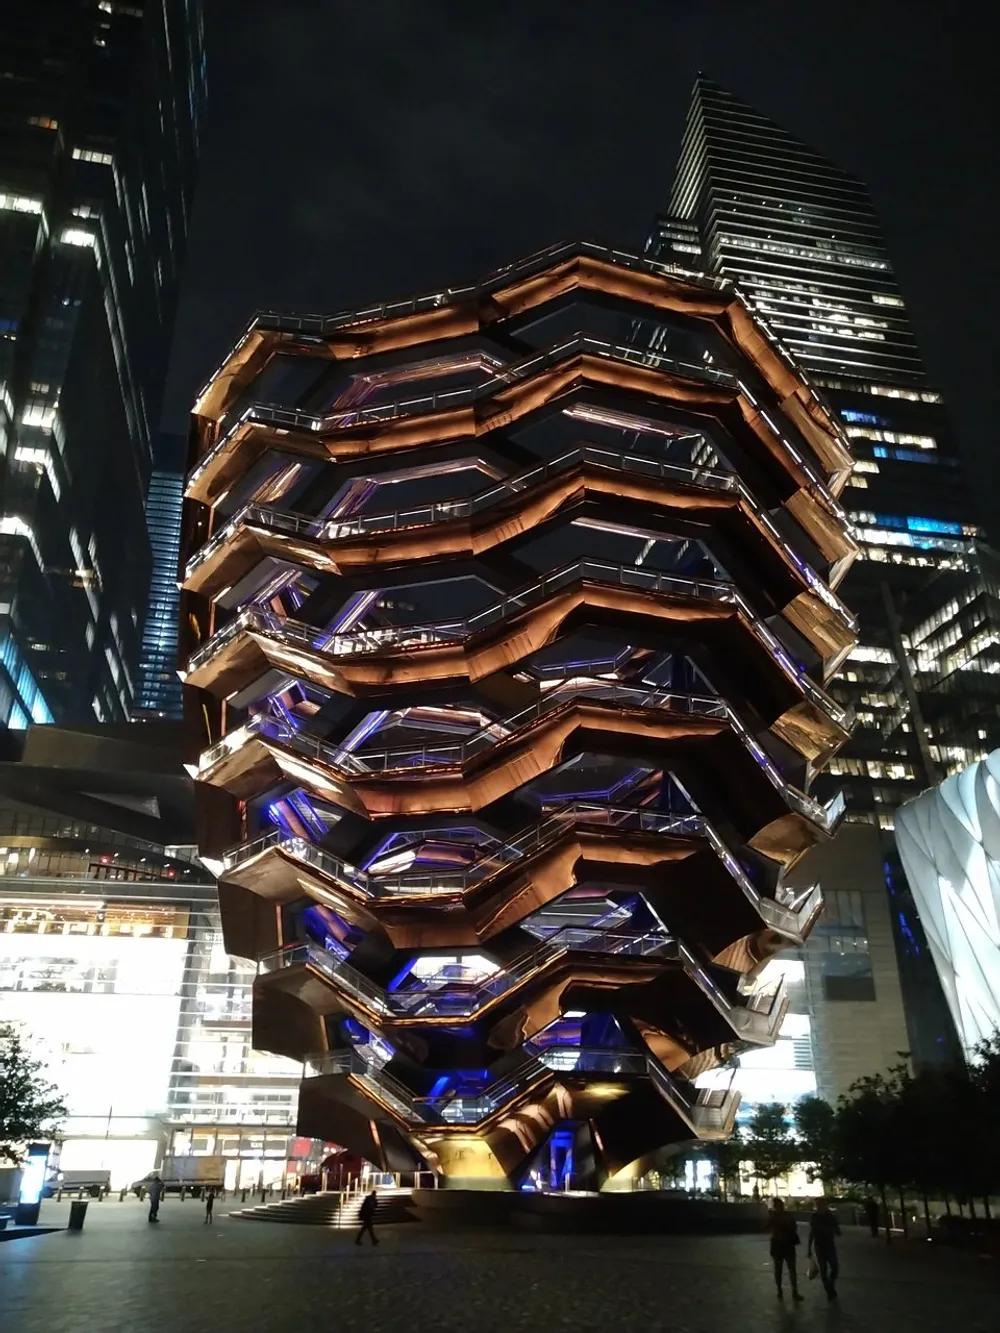 The image showcases a striking honeycomb-like structure illuminated at night with modern skyscrapers in the background highlighting a blend of innovative architecture and urban nightlife